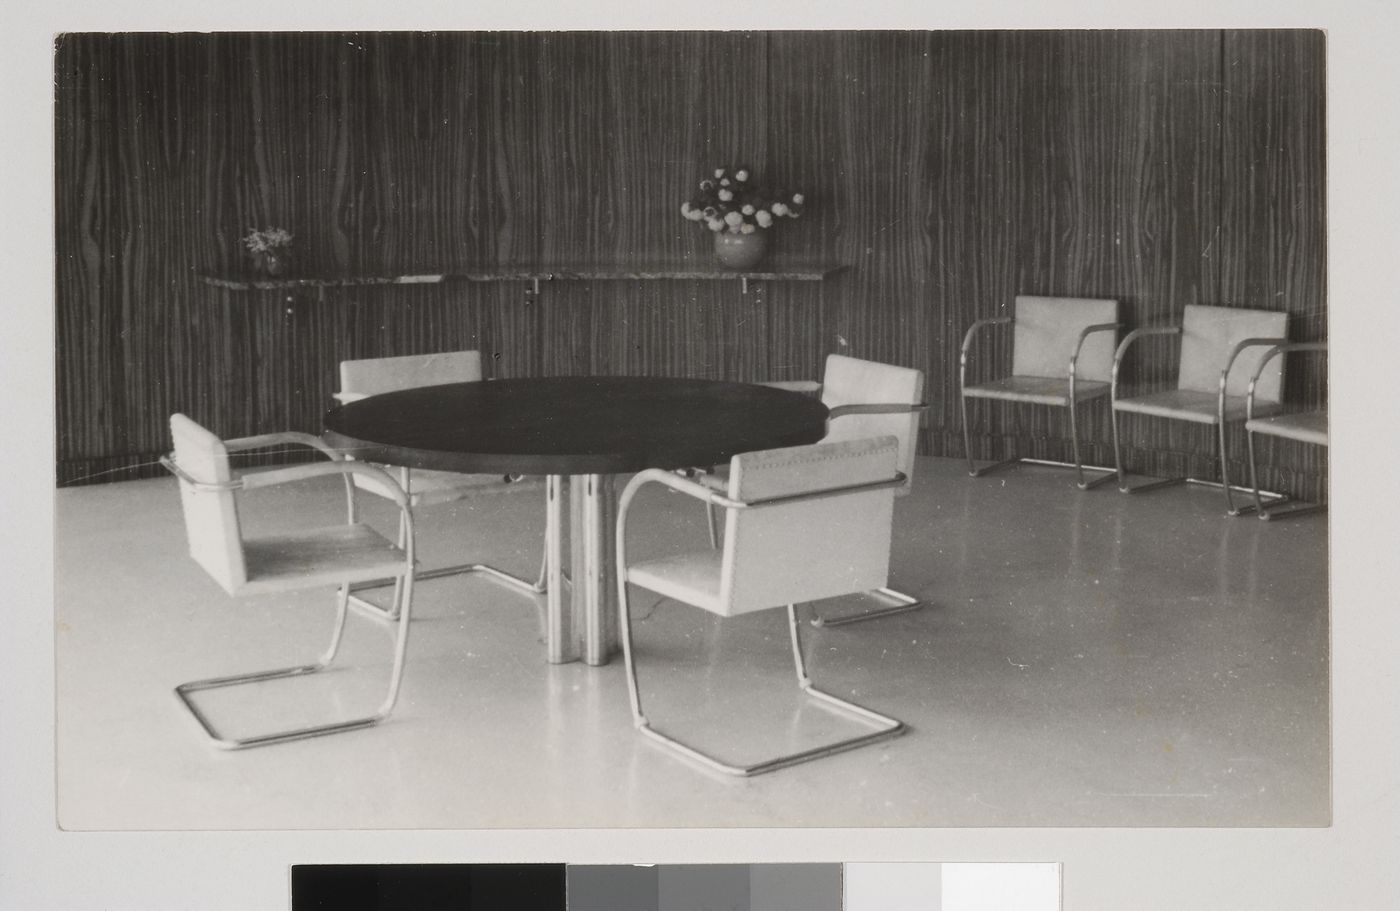 Interior view of the dining area of Tugendhat House, Brno, Czechoslovakia (now Czech Republic)